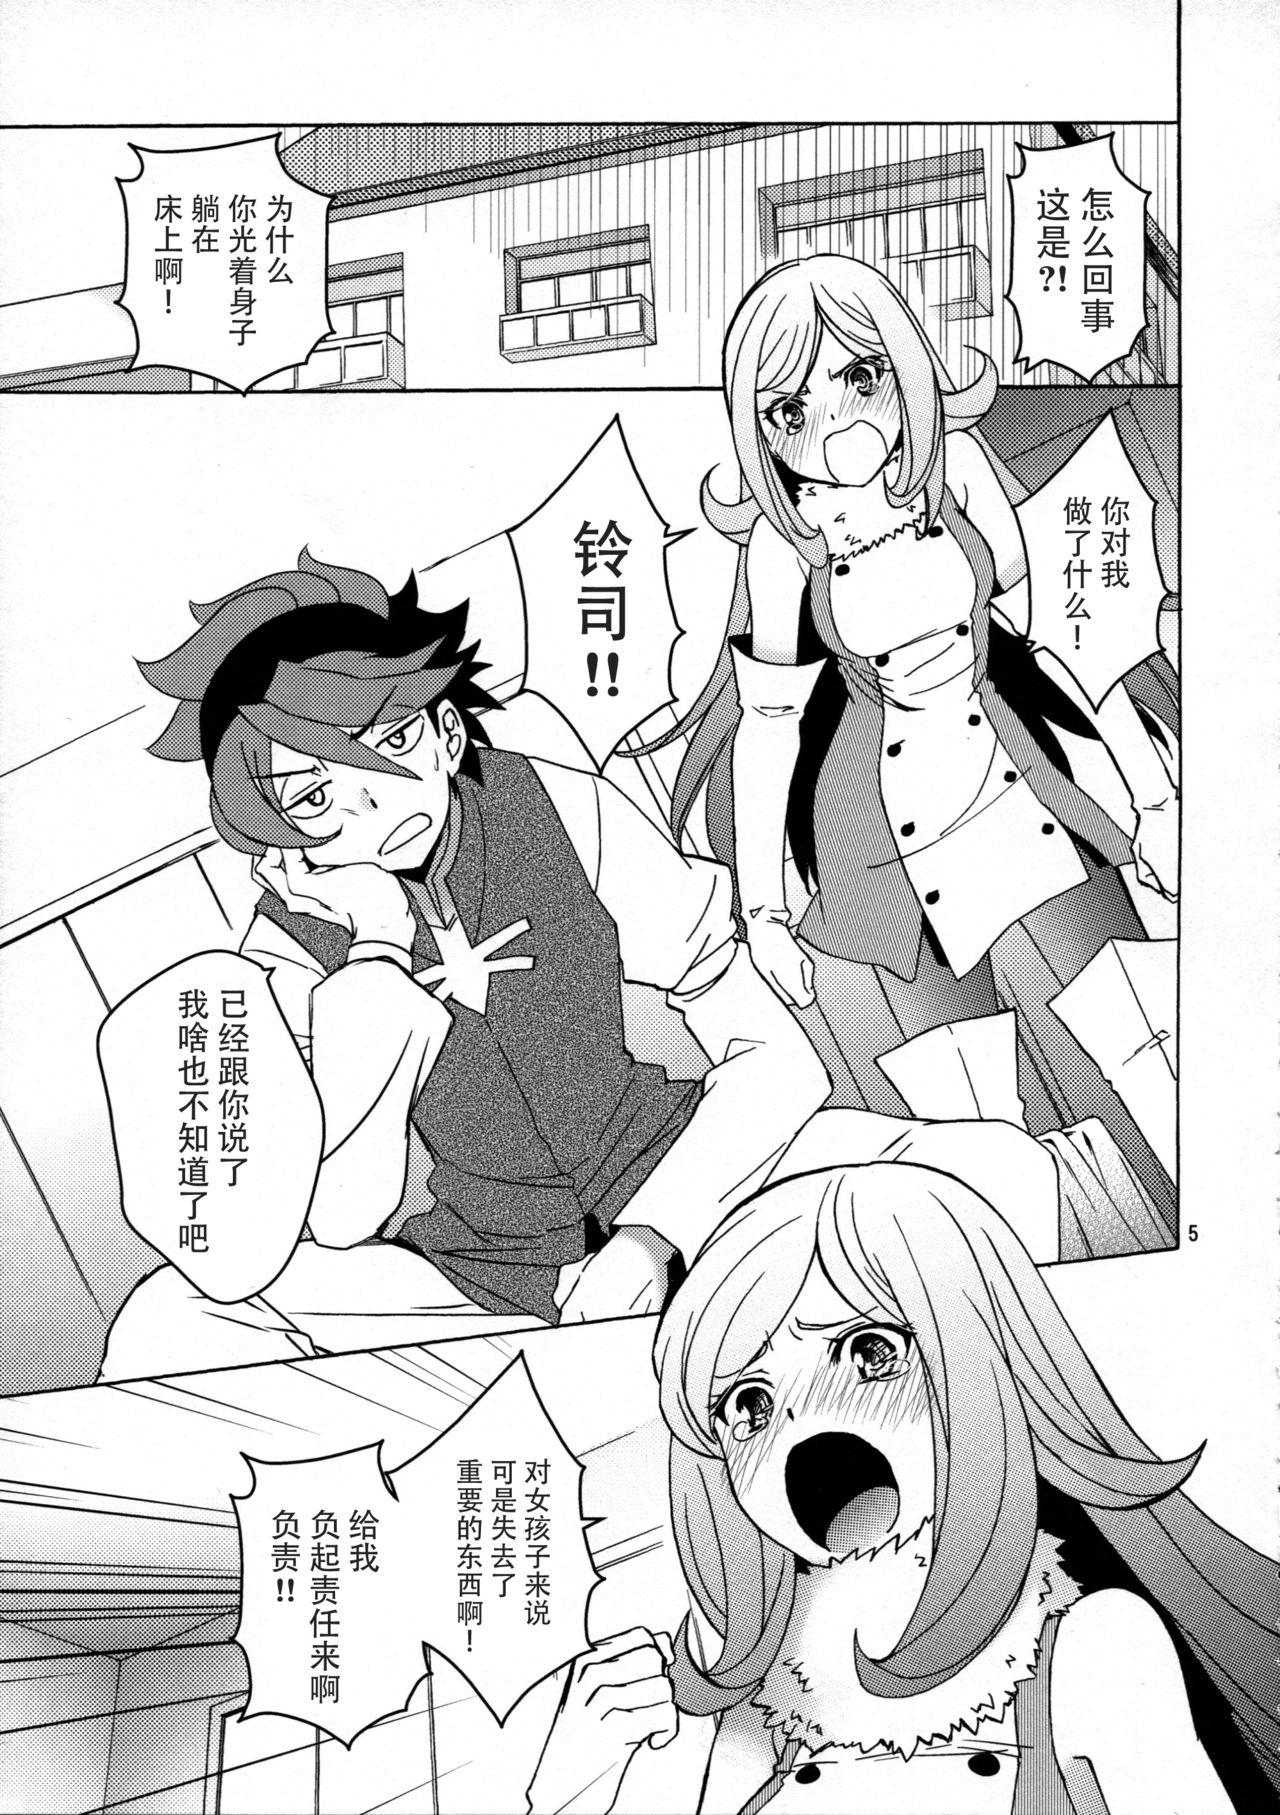 Bisex Rei x Ai - Gundam build fighters Pounding - Page 6